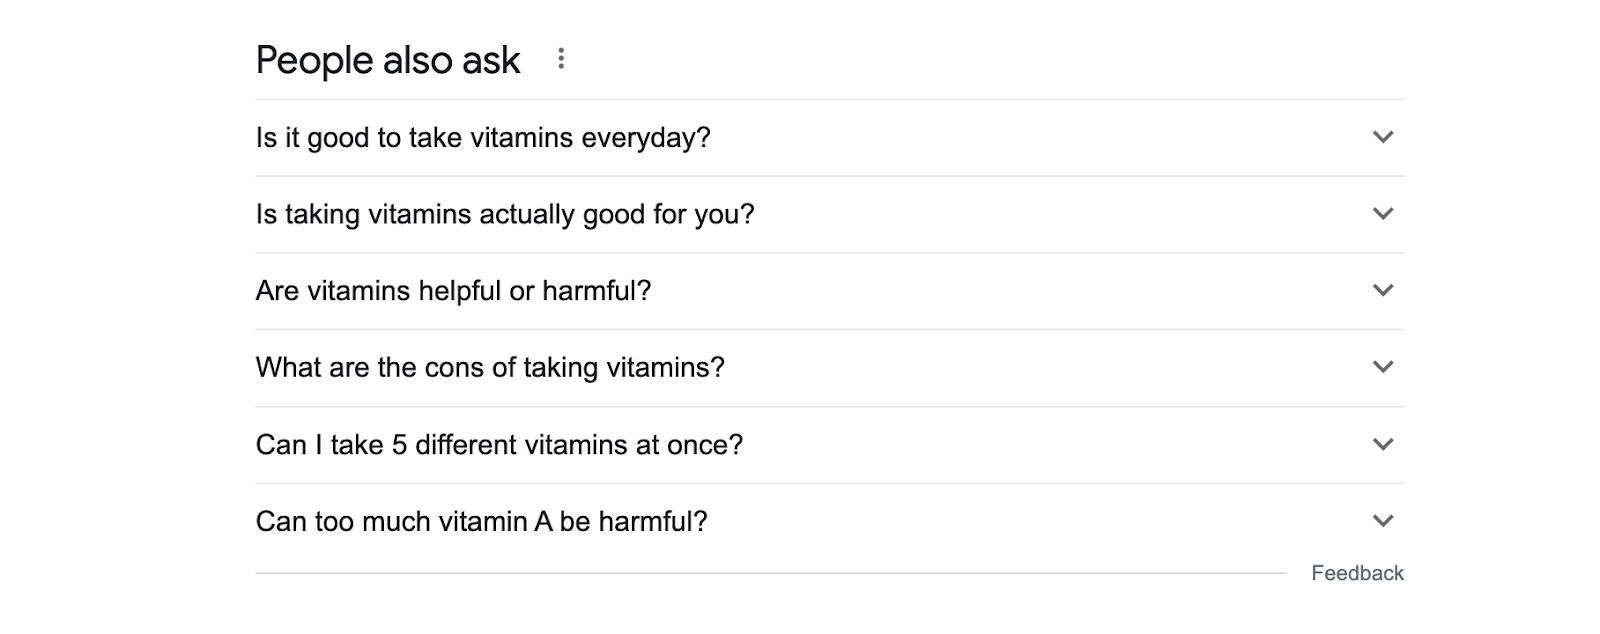 vitamin people also ask results in Google